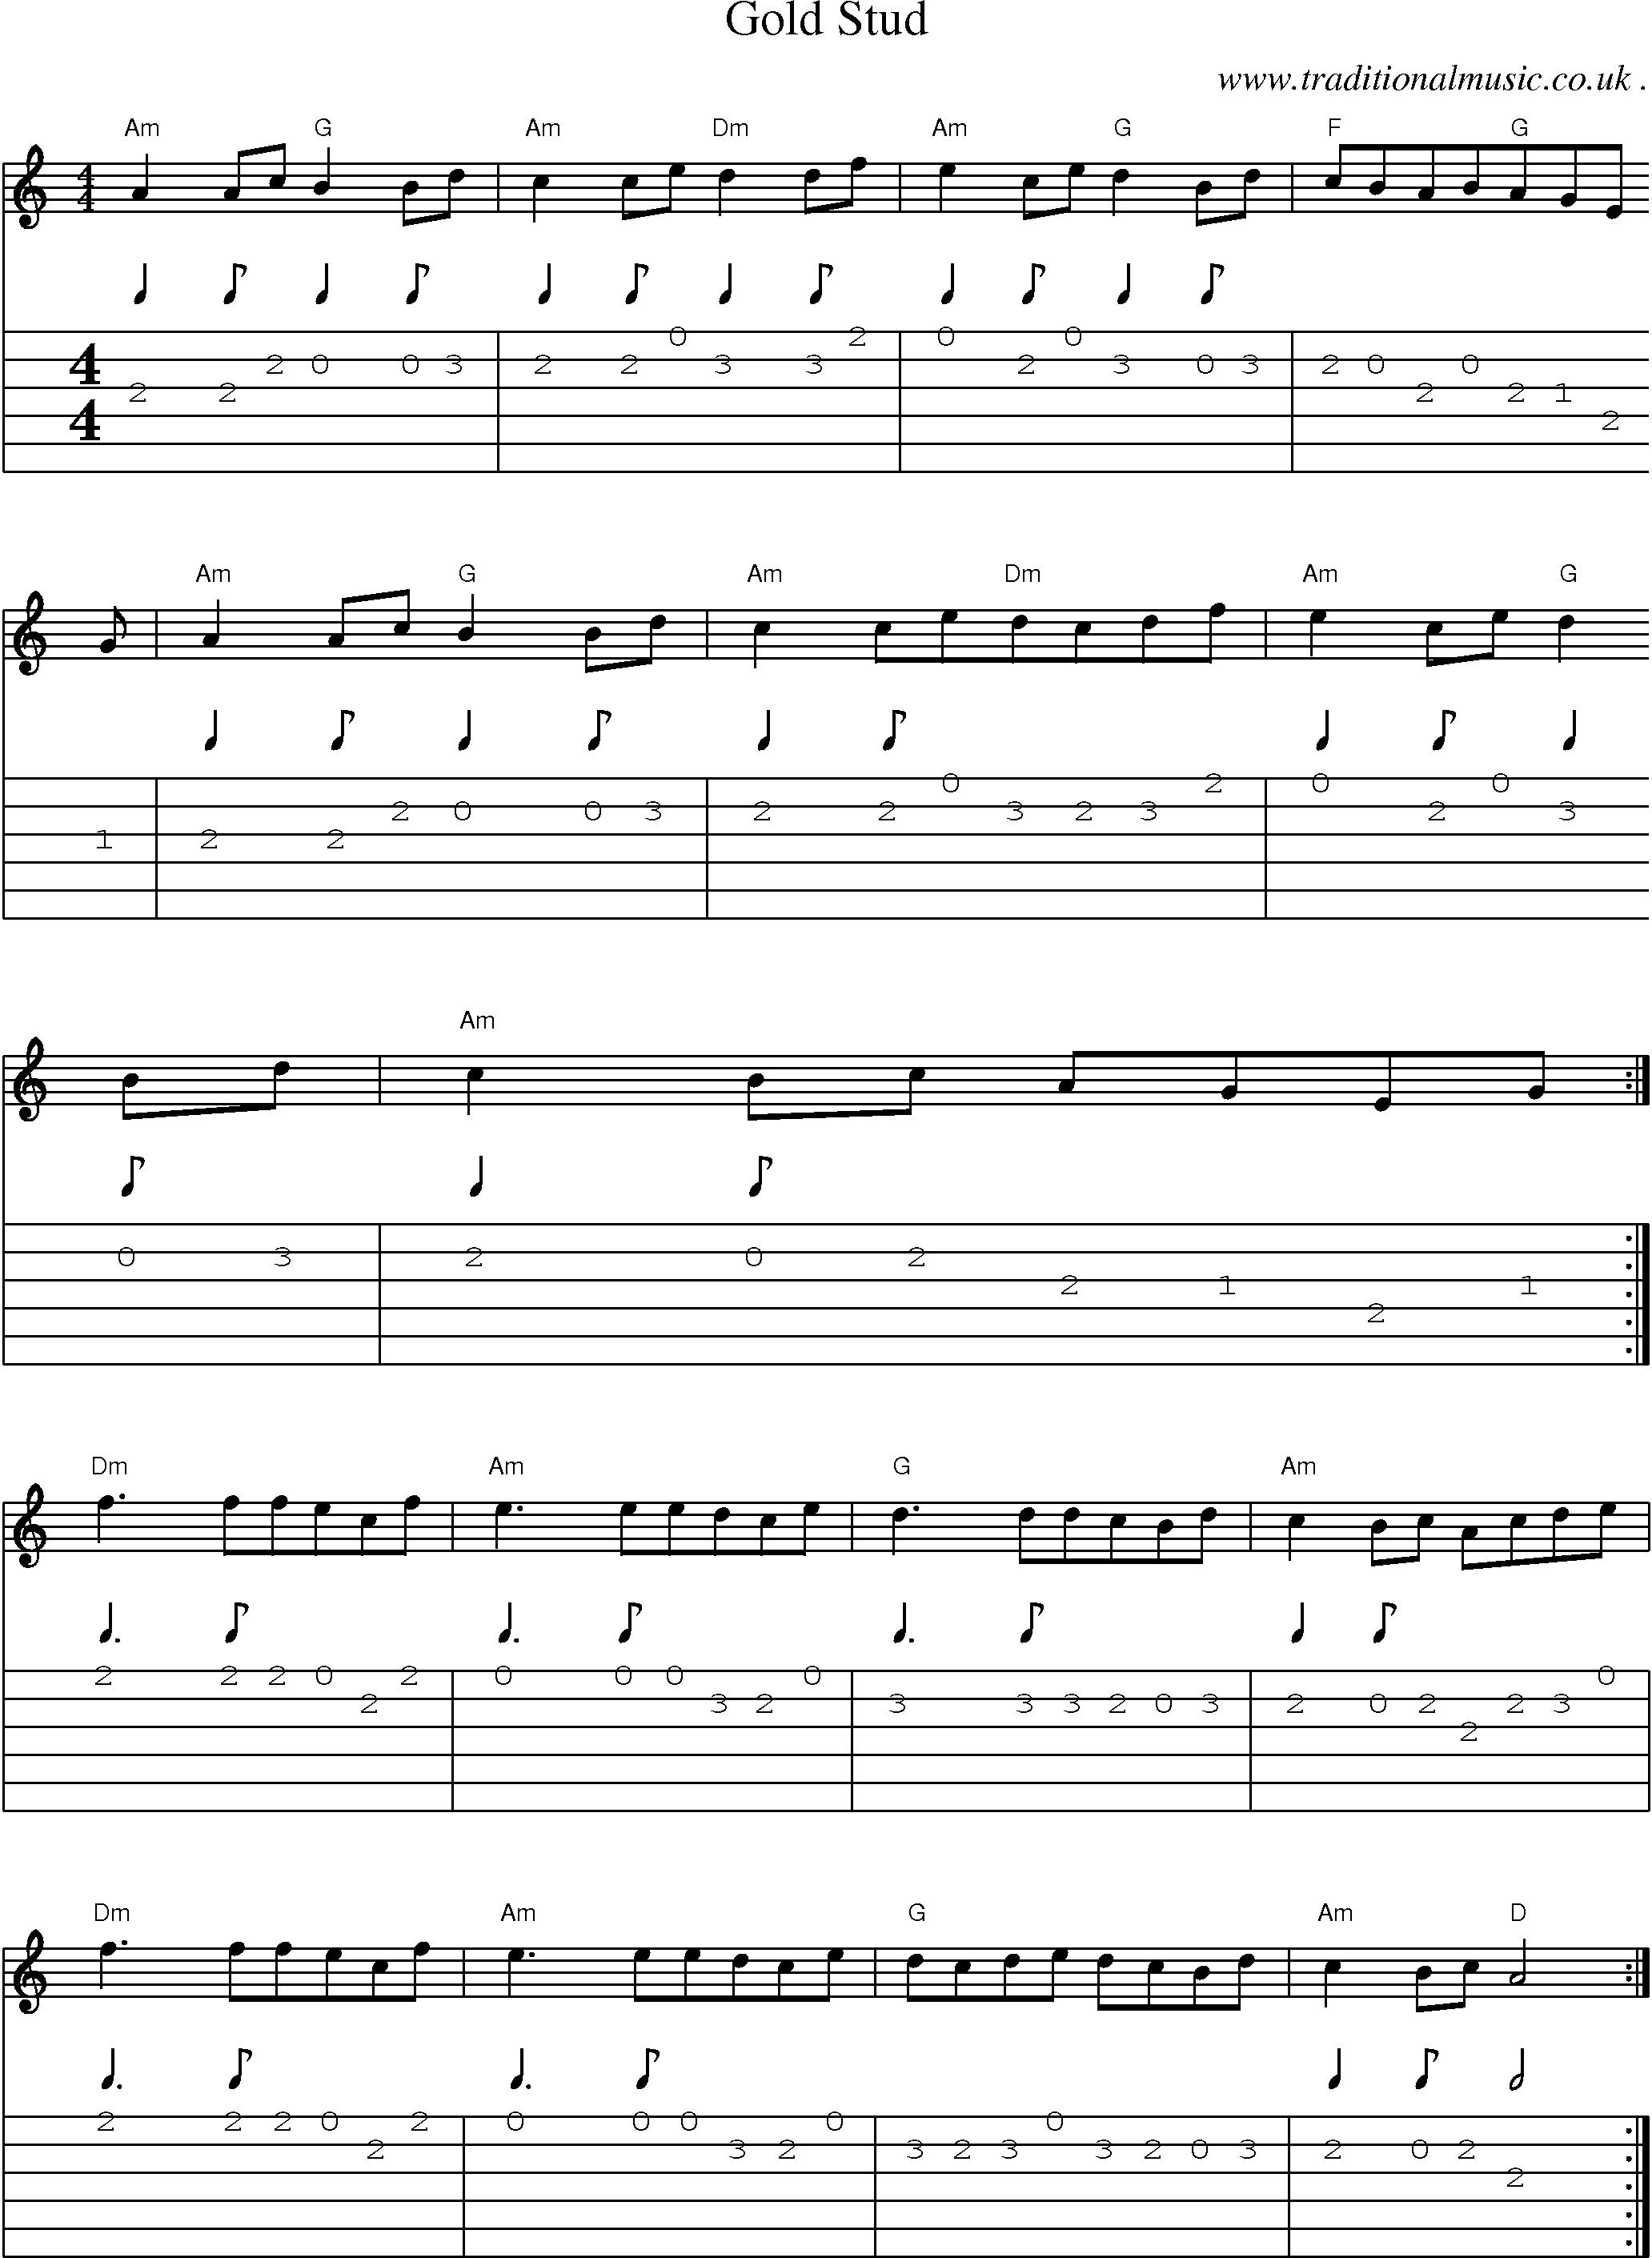 Sheet-Music and Guitar Tabs for Gold Stud